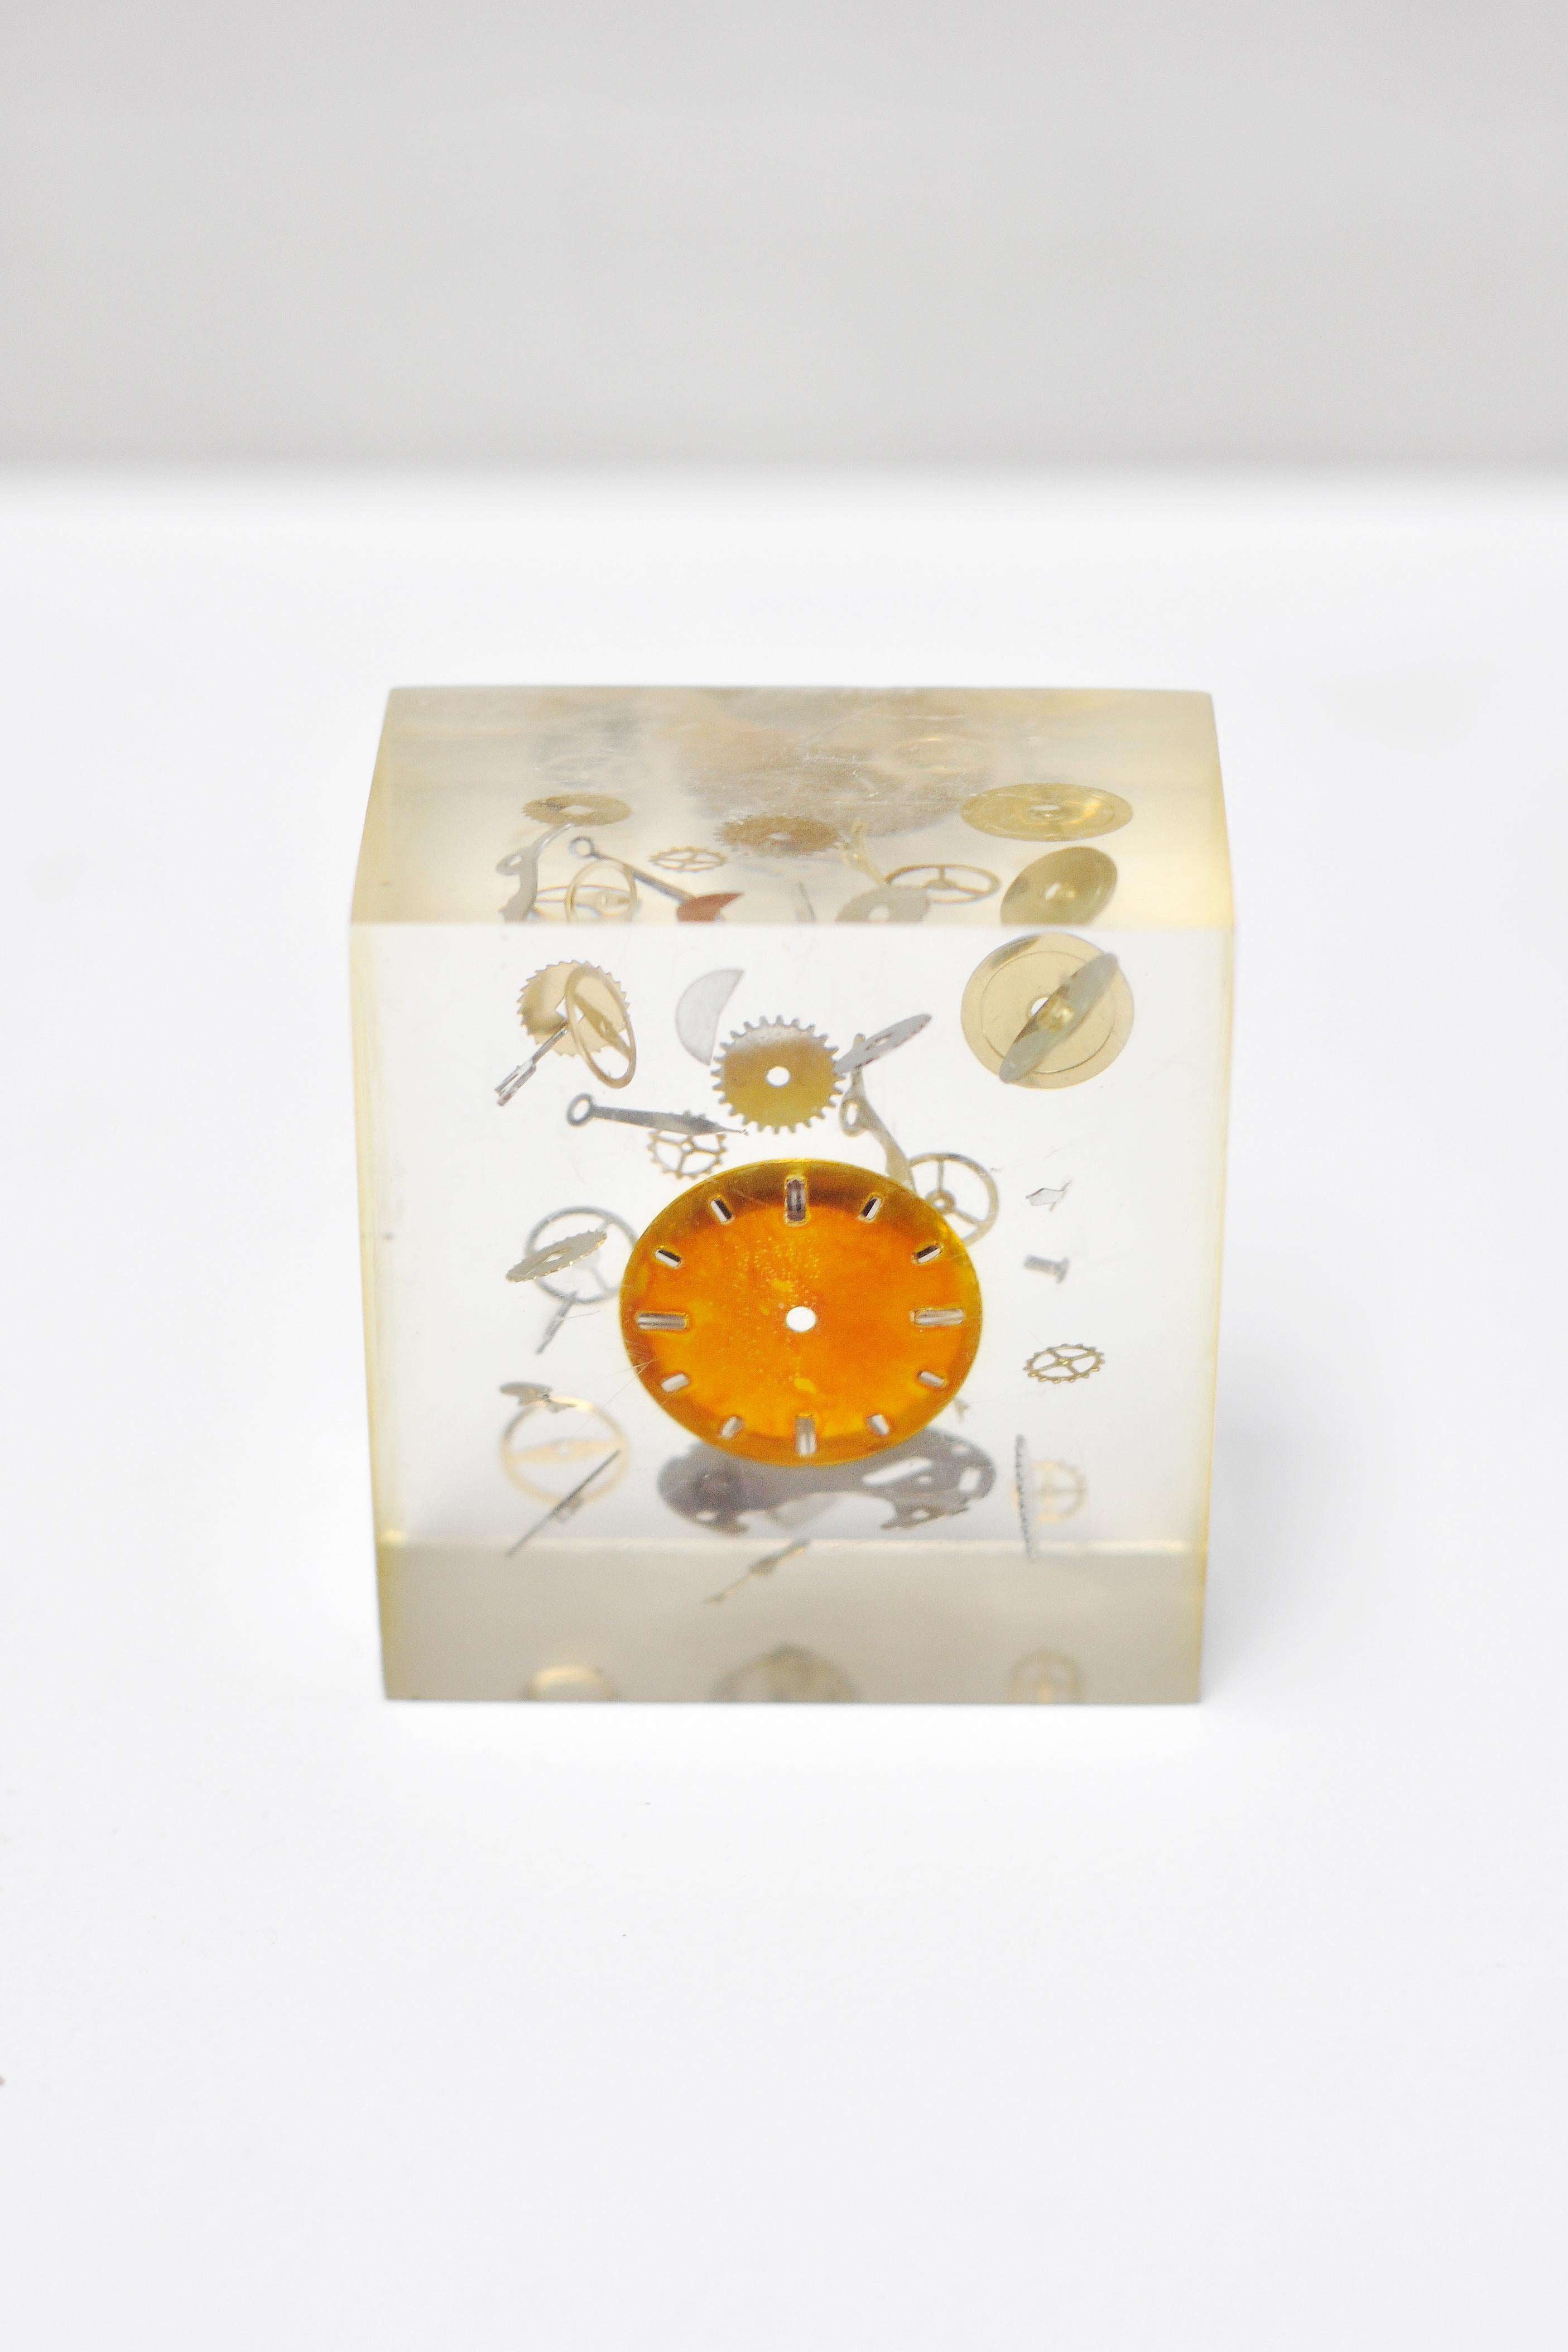 A rarely seen cube object in resin and Lucite by the French artist Pierre Giraudon. Shows an 'exploded clock' with all detailed components. A very decorative object.

In good condition, occasional scuffs/marks on the surface which do not take away